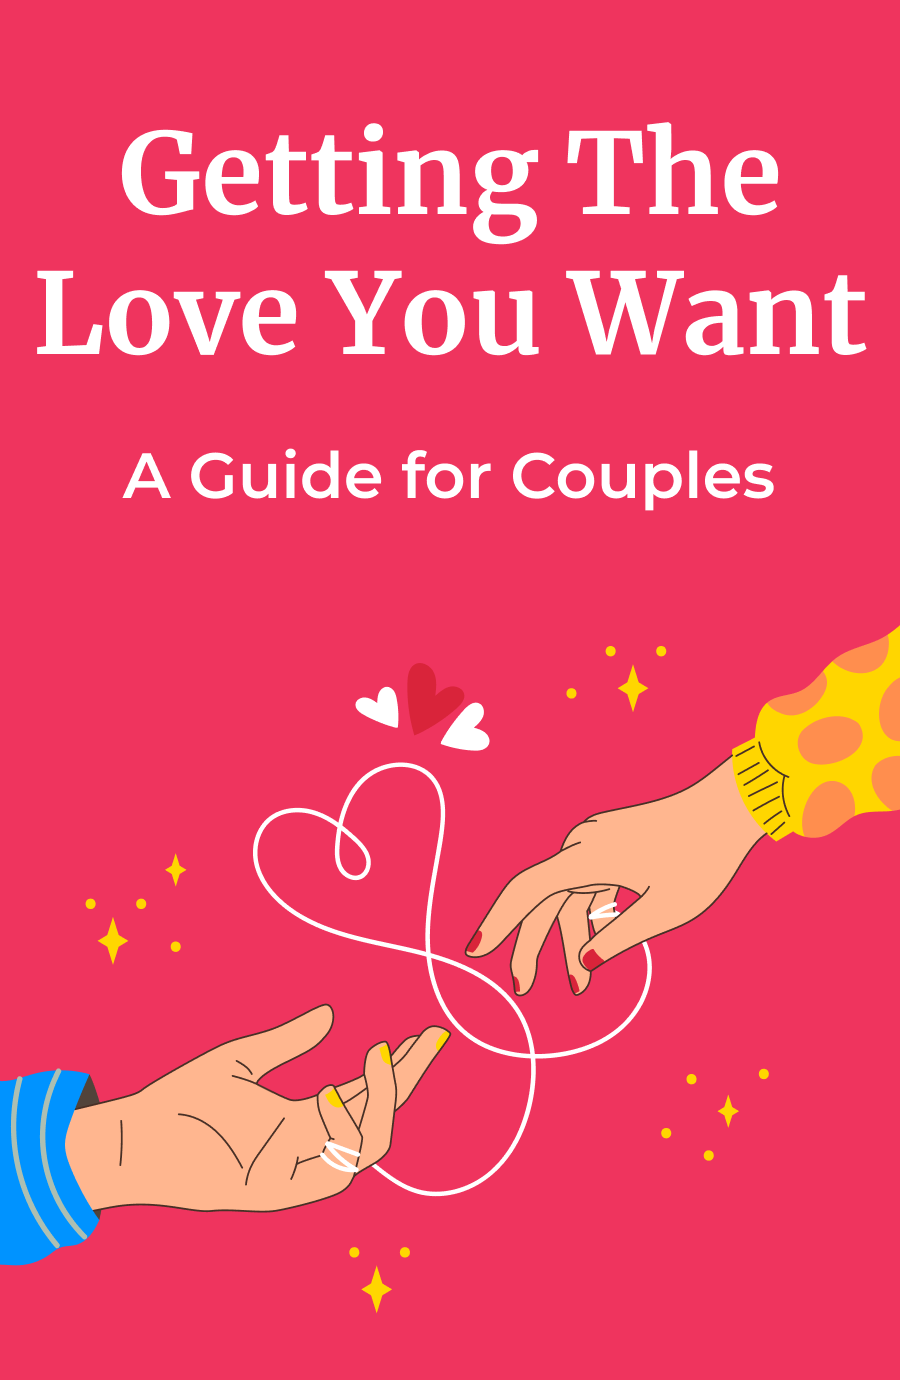 Getting The Love You Want: A Guide for Couples Book Cover